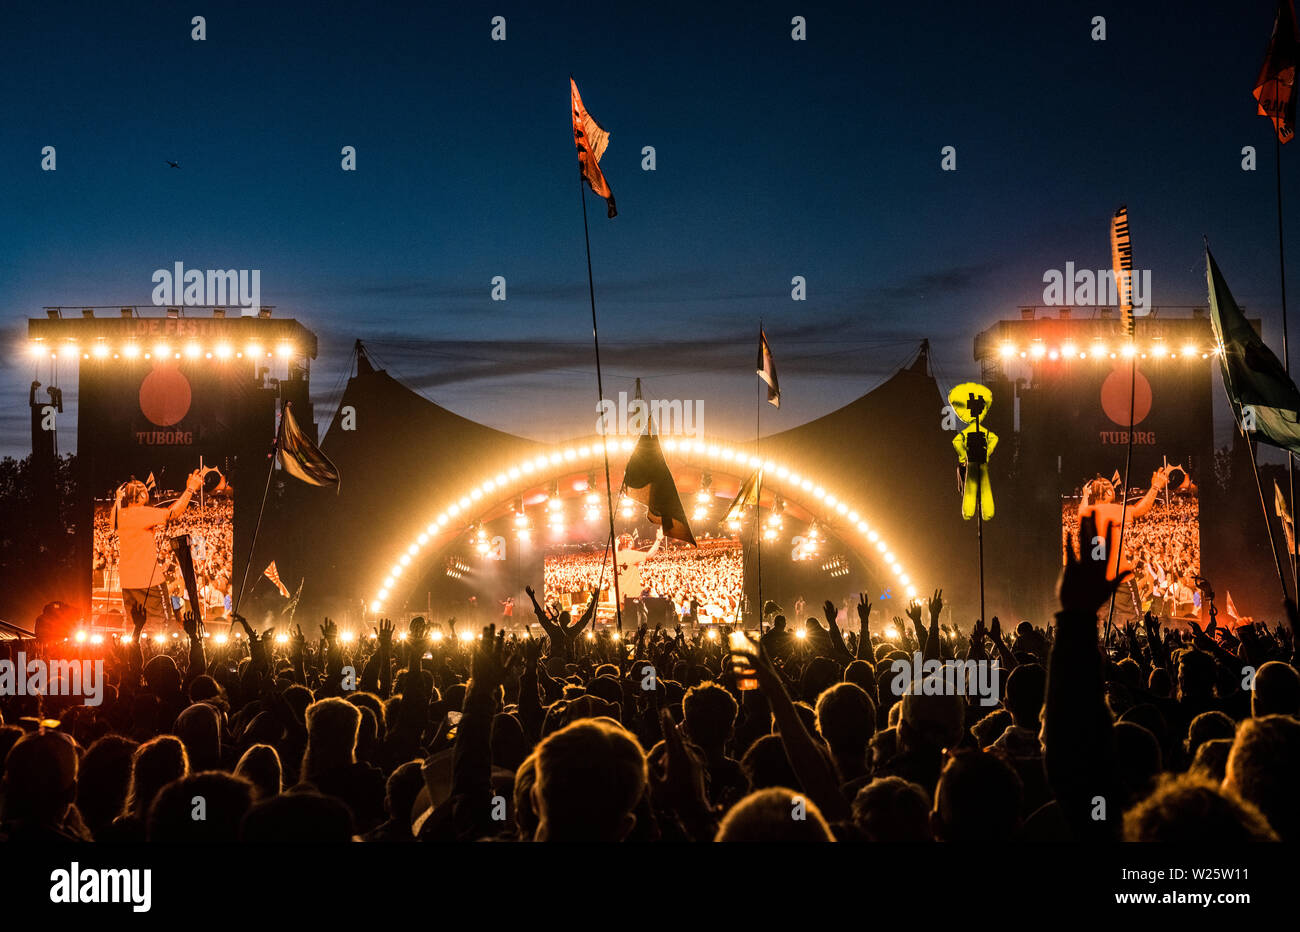 Roskilde, Denmark. July 05th, 2019. Impressive view over the stage area in  front of the main stage, the Orange Stage, at the Danish music festival  Roskilde Festival 2019. (Photo credit: Gonzales Photo -